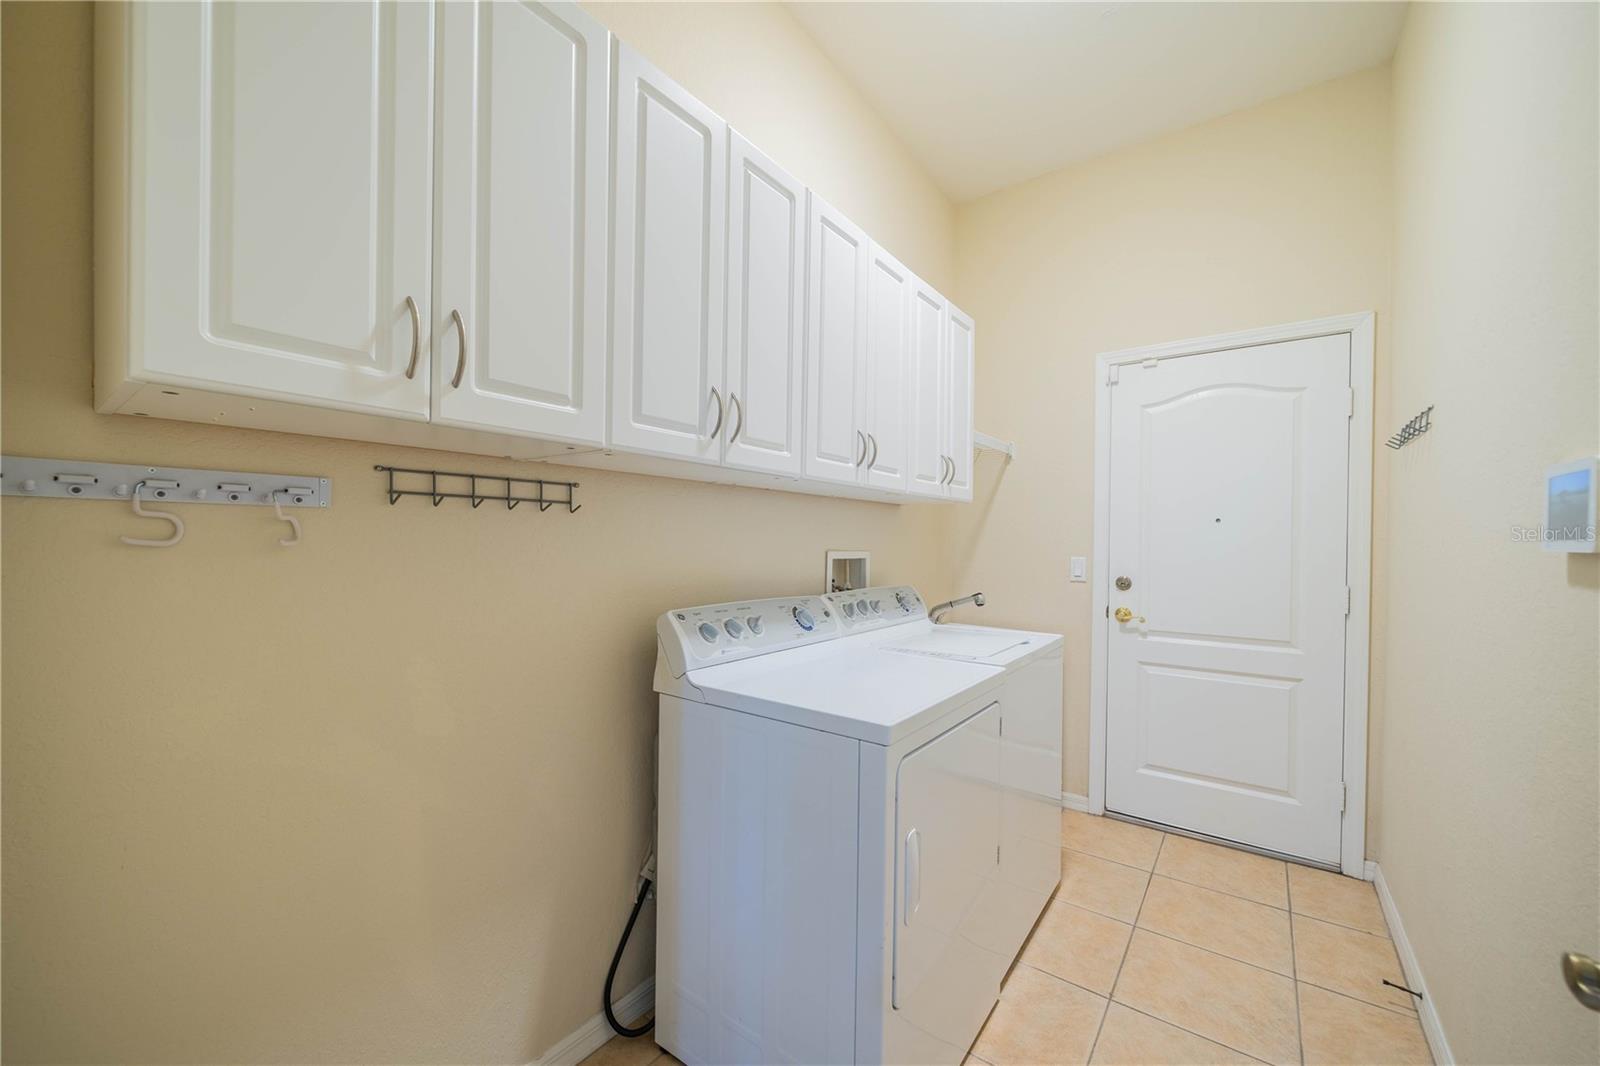 Laundry room with washer/dryer, sink, cabinets and extra space on left